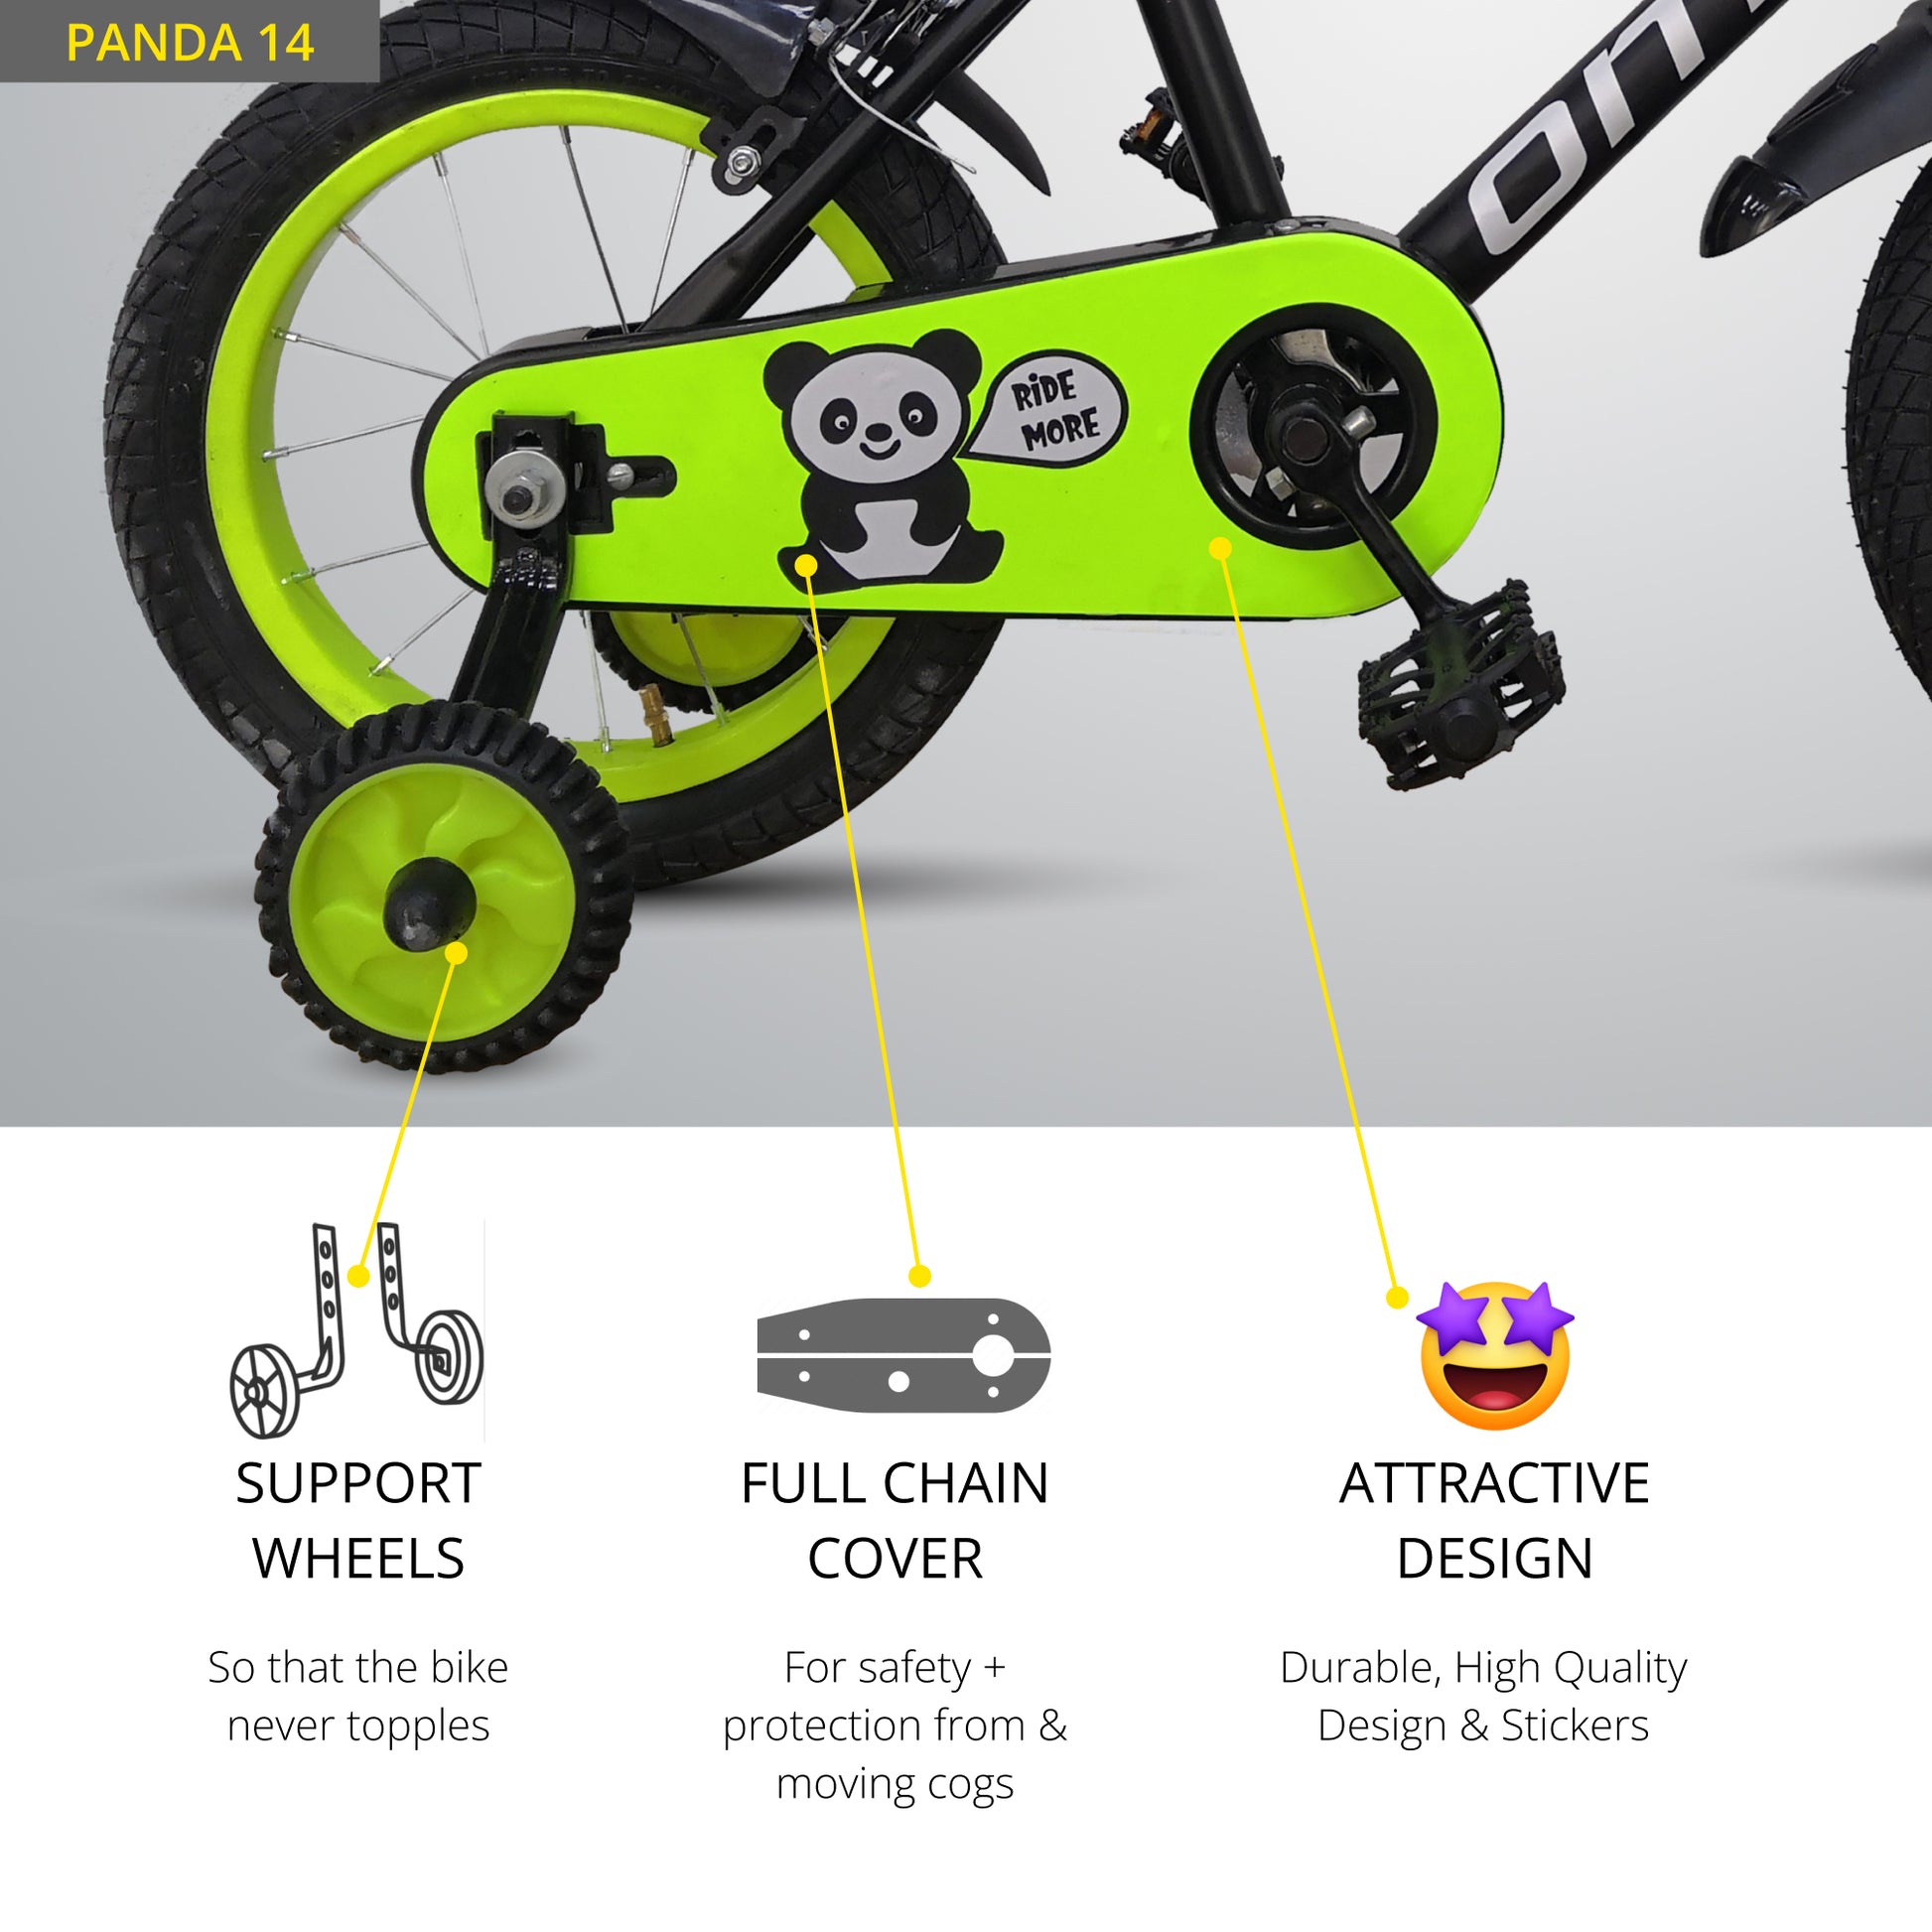 omobikes panda 14T kids cycle 3 to 5 year key features support wheel, pedal view